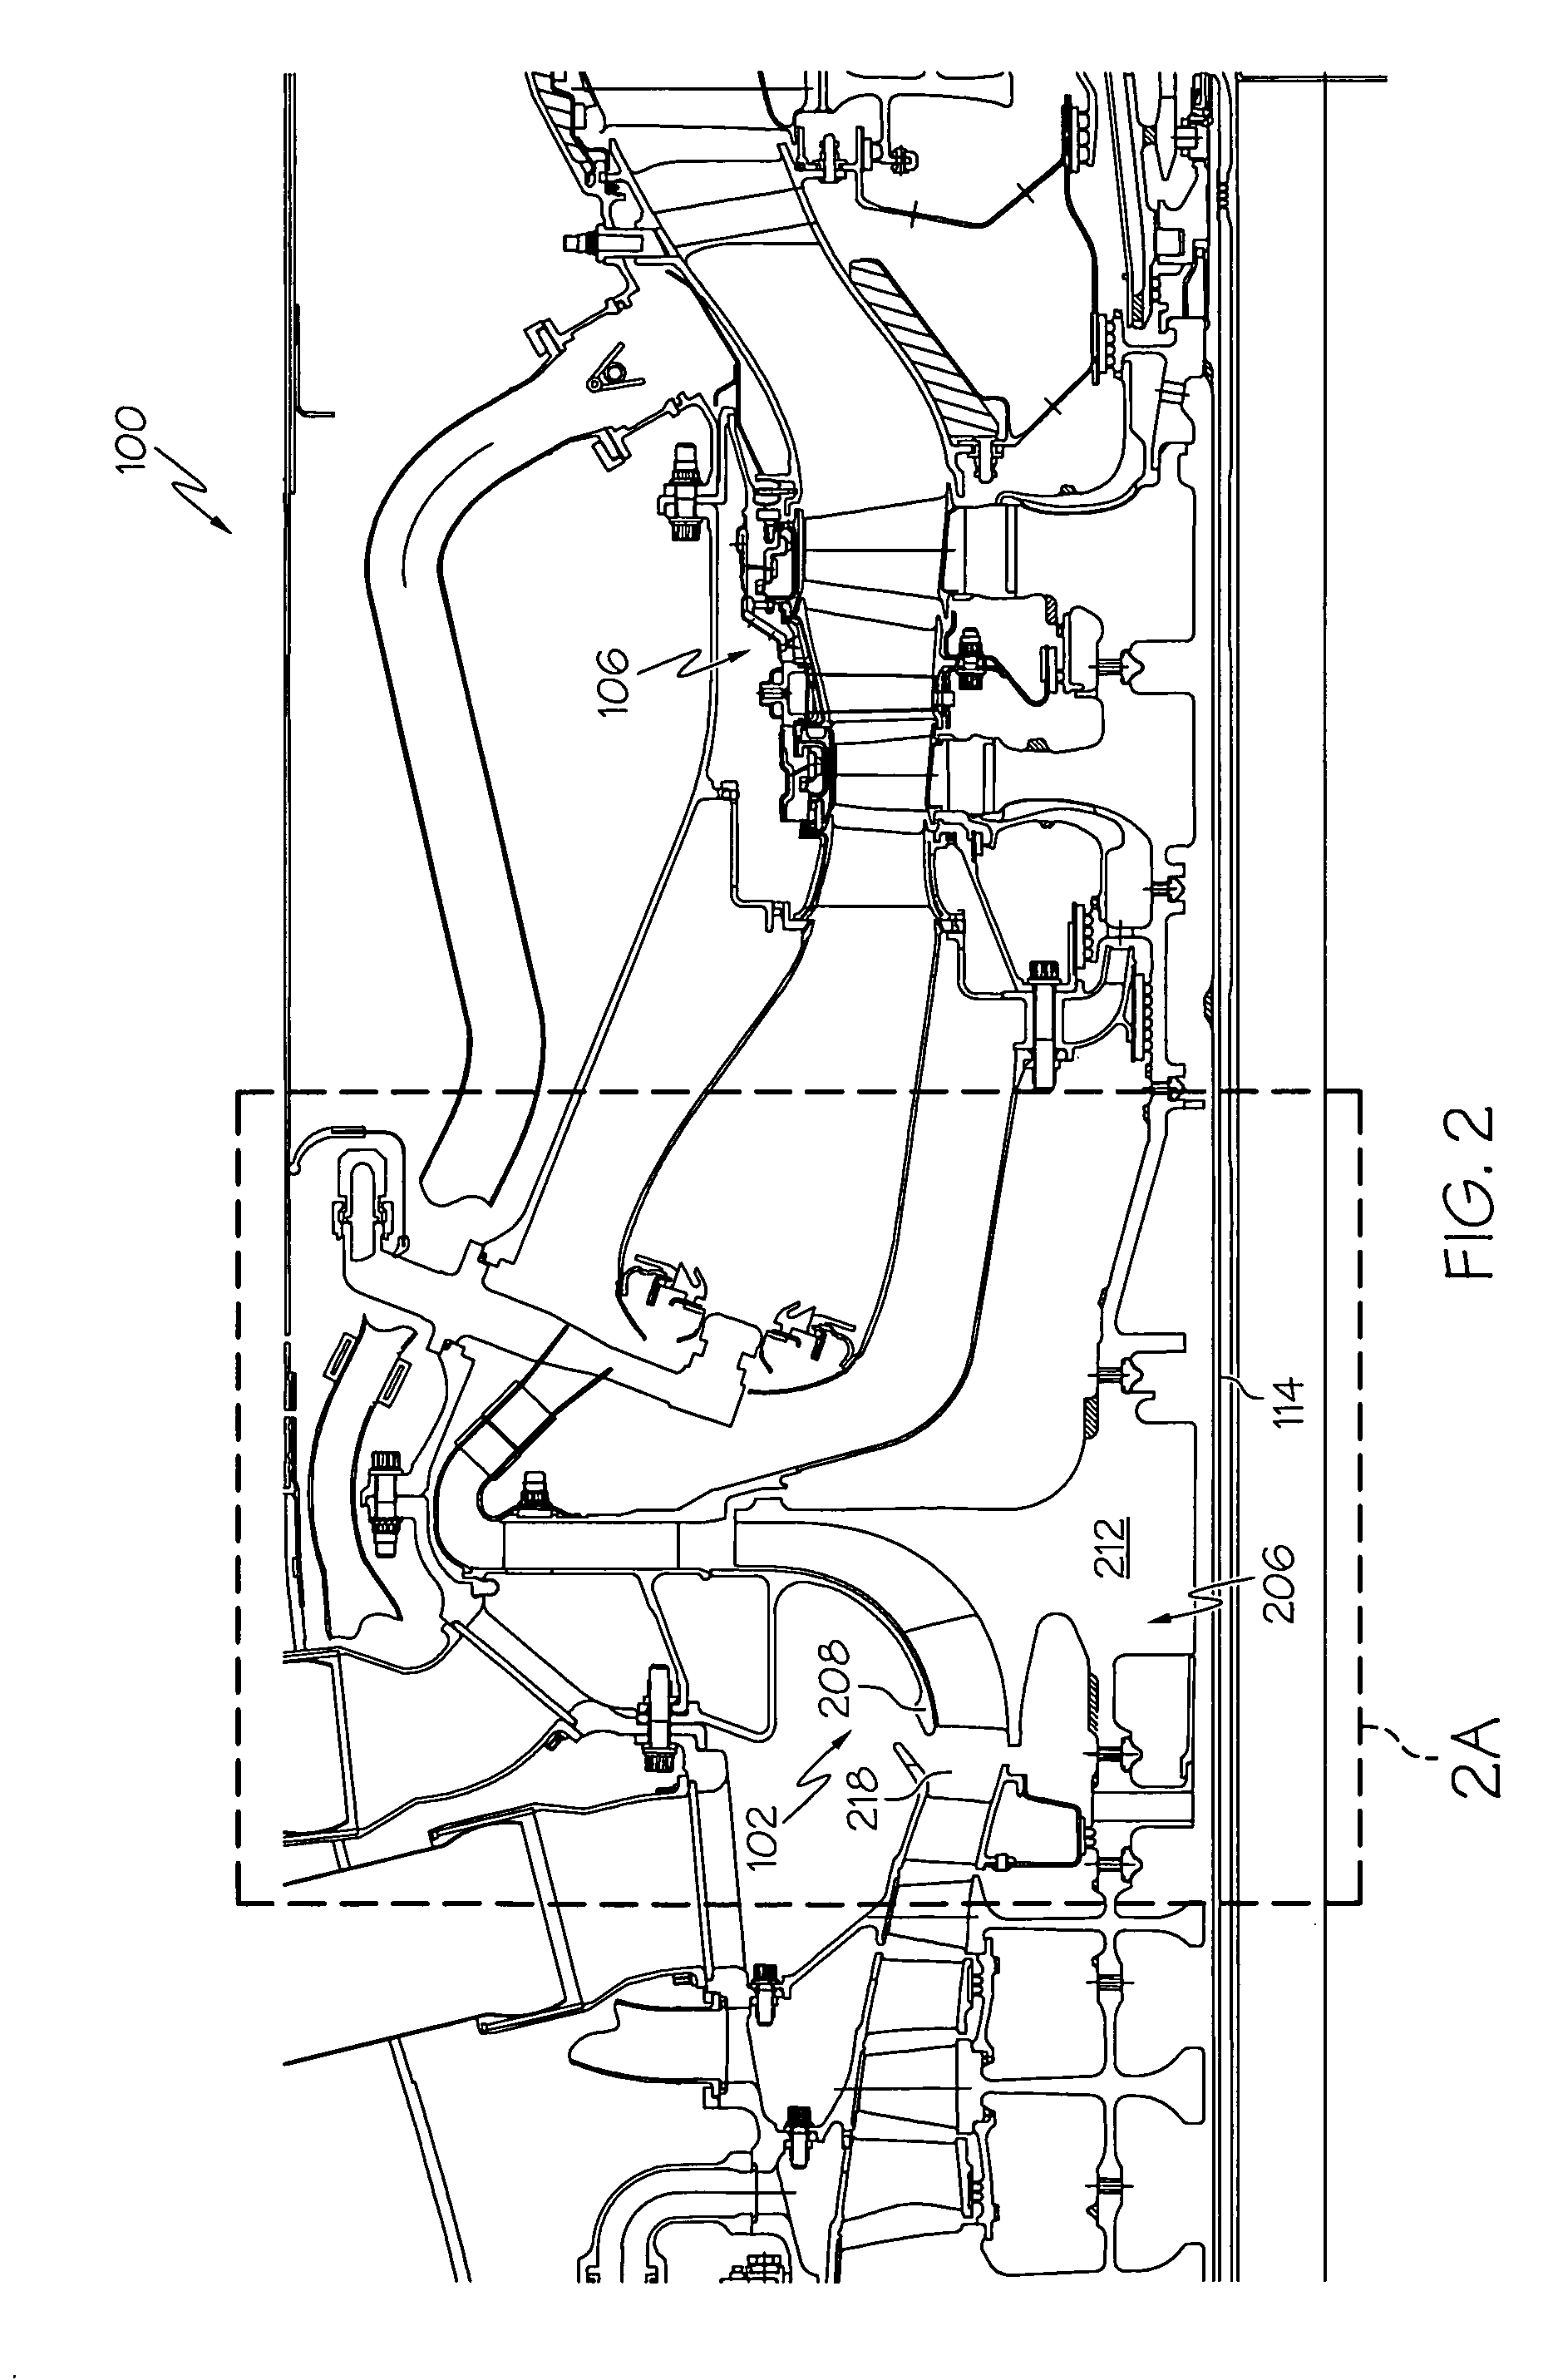 Plasma flow controlled diffuser system